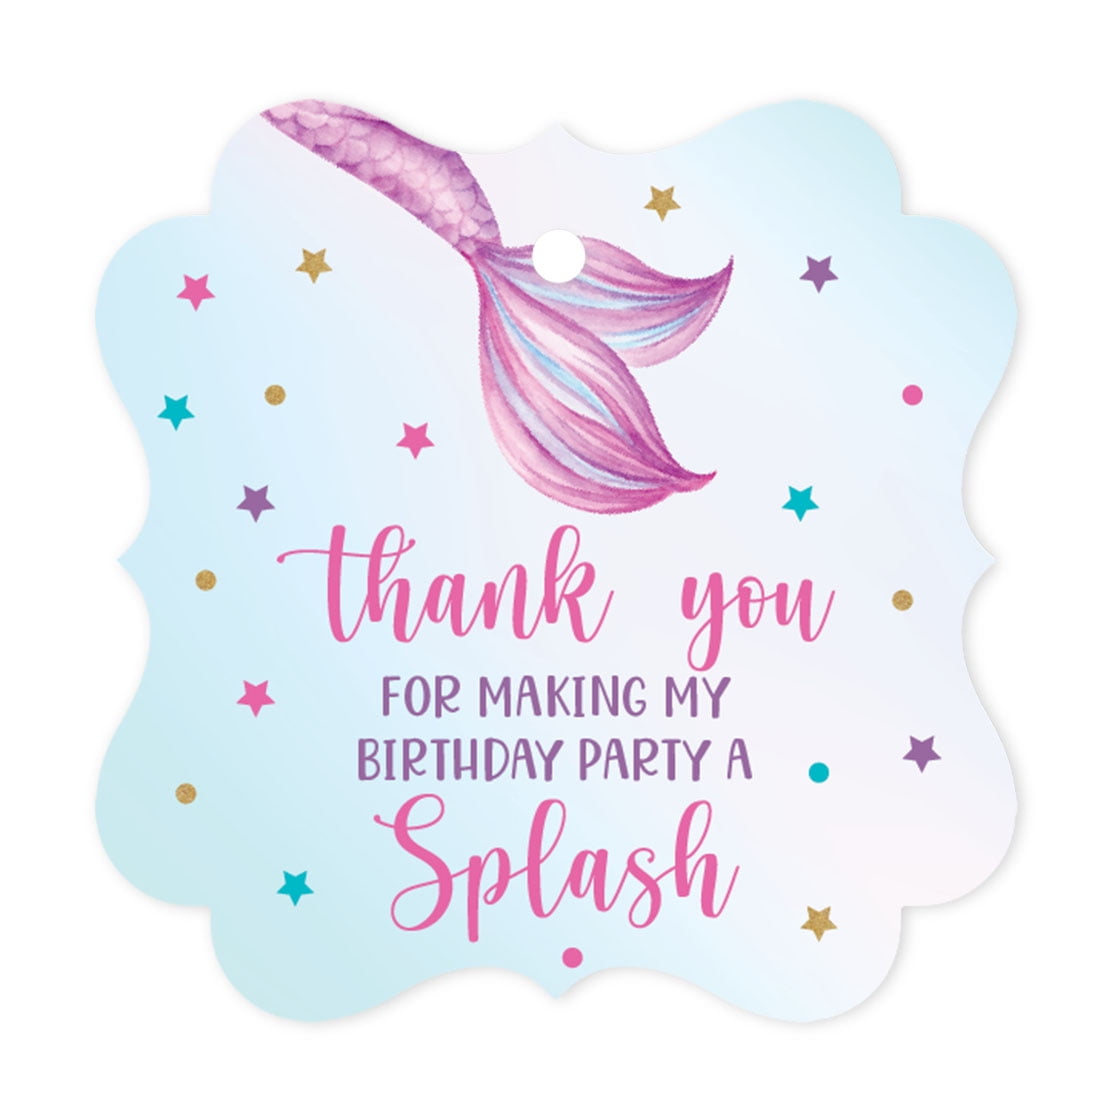 Koyal Wholesale Kids Party Favor Classic Thank You for Making My Party So Magical Gift Tags with String, Unicorn Tags, White